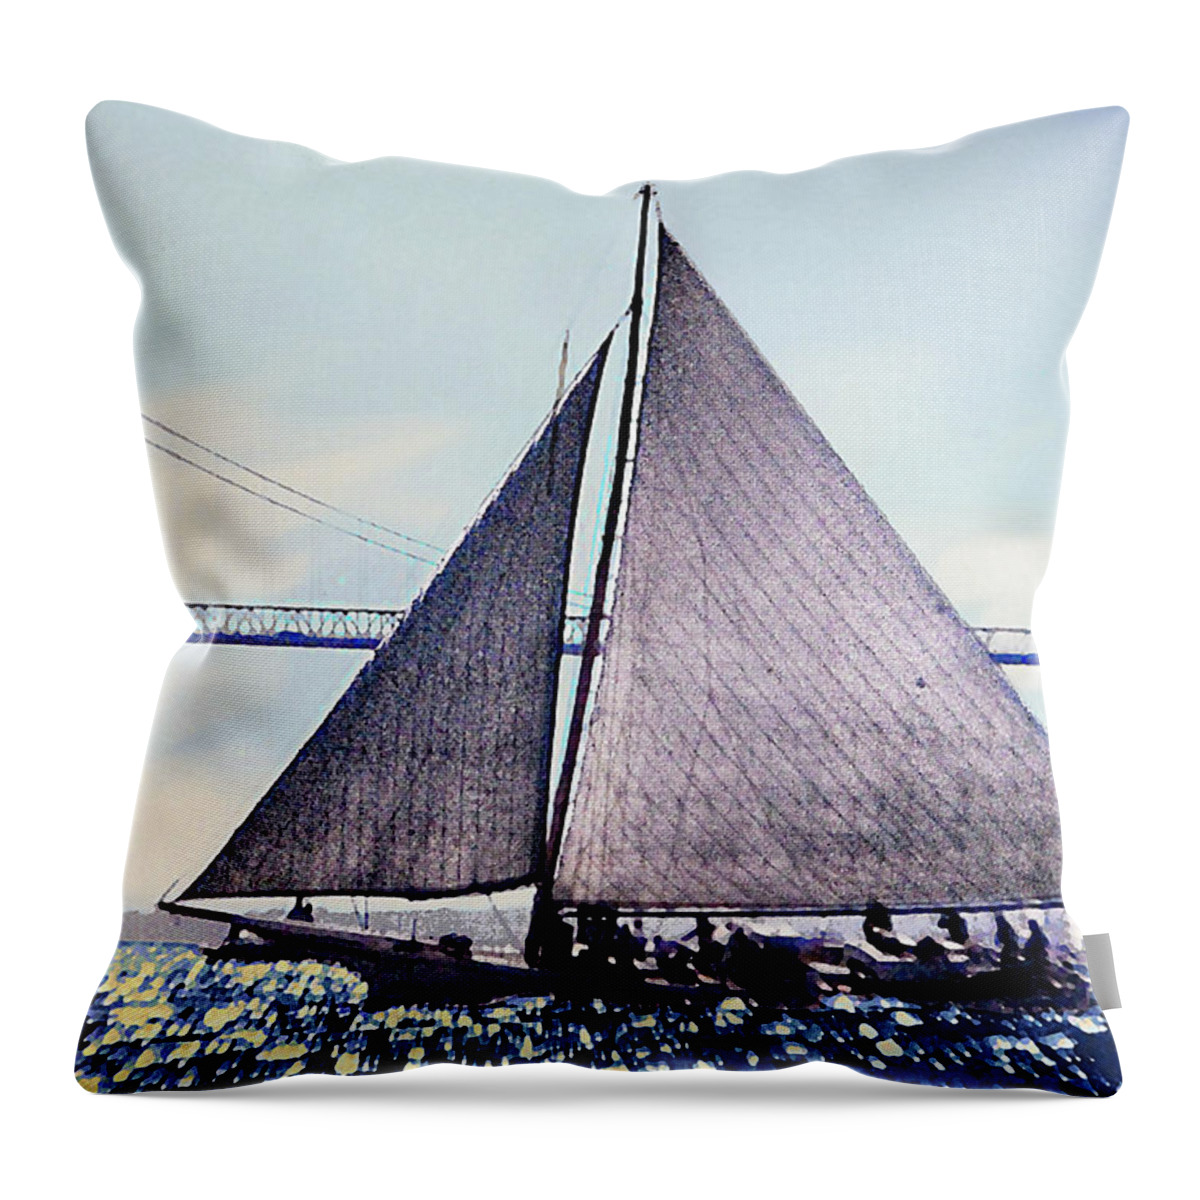 Fine Art Throw Pillow featuring the painting Skipjacks Racing Chesapeake Bay Maryland Contemporary Digital Art Work by G Linsenmayer